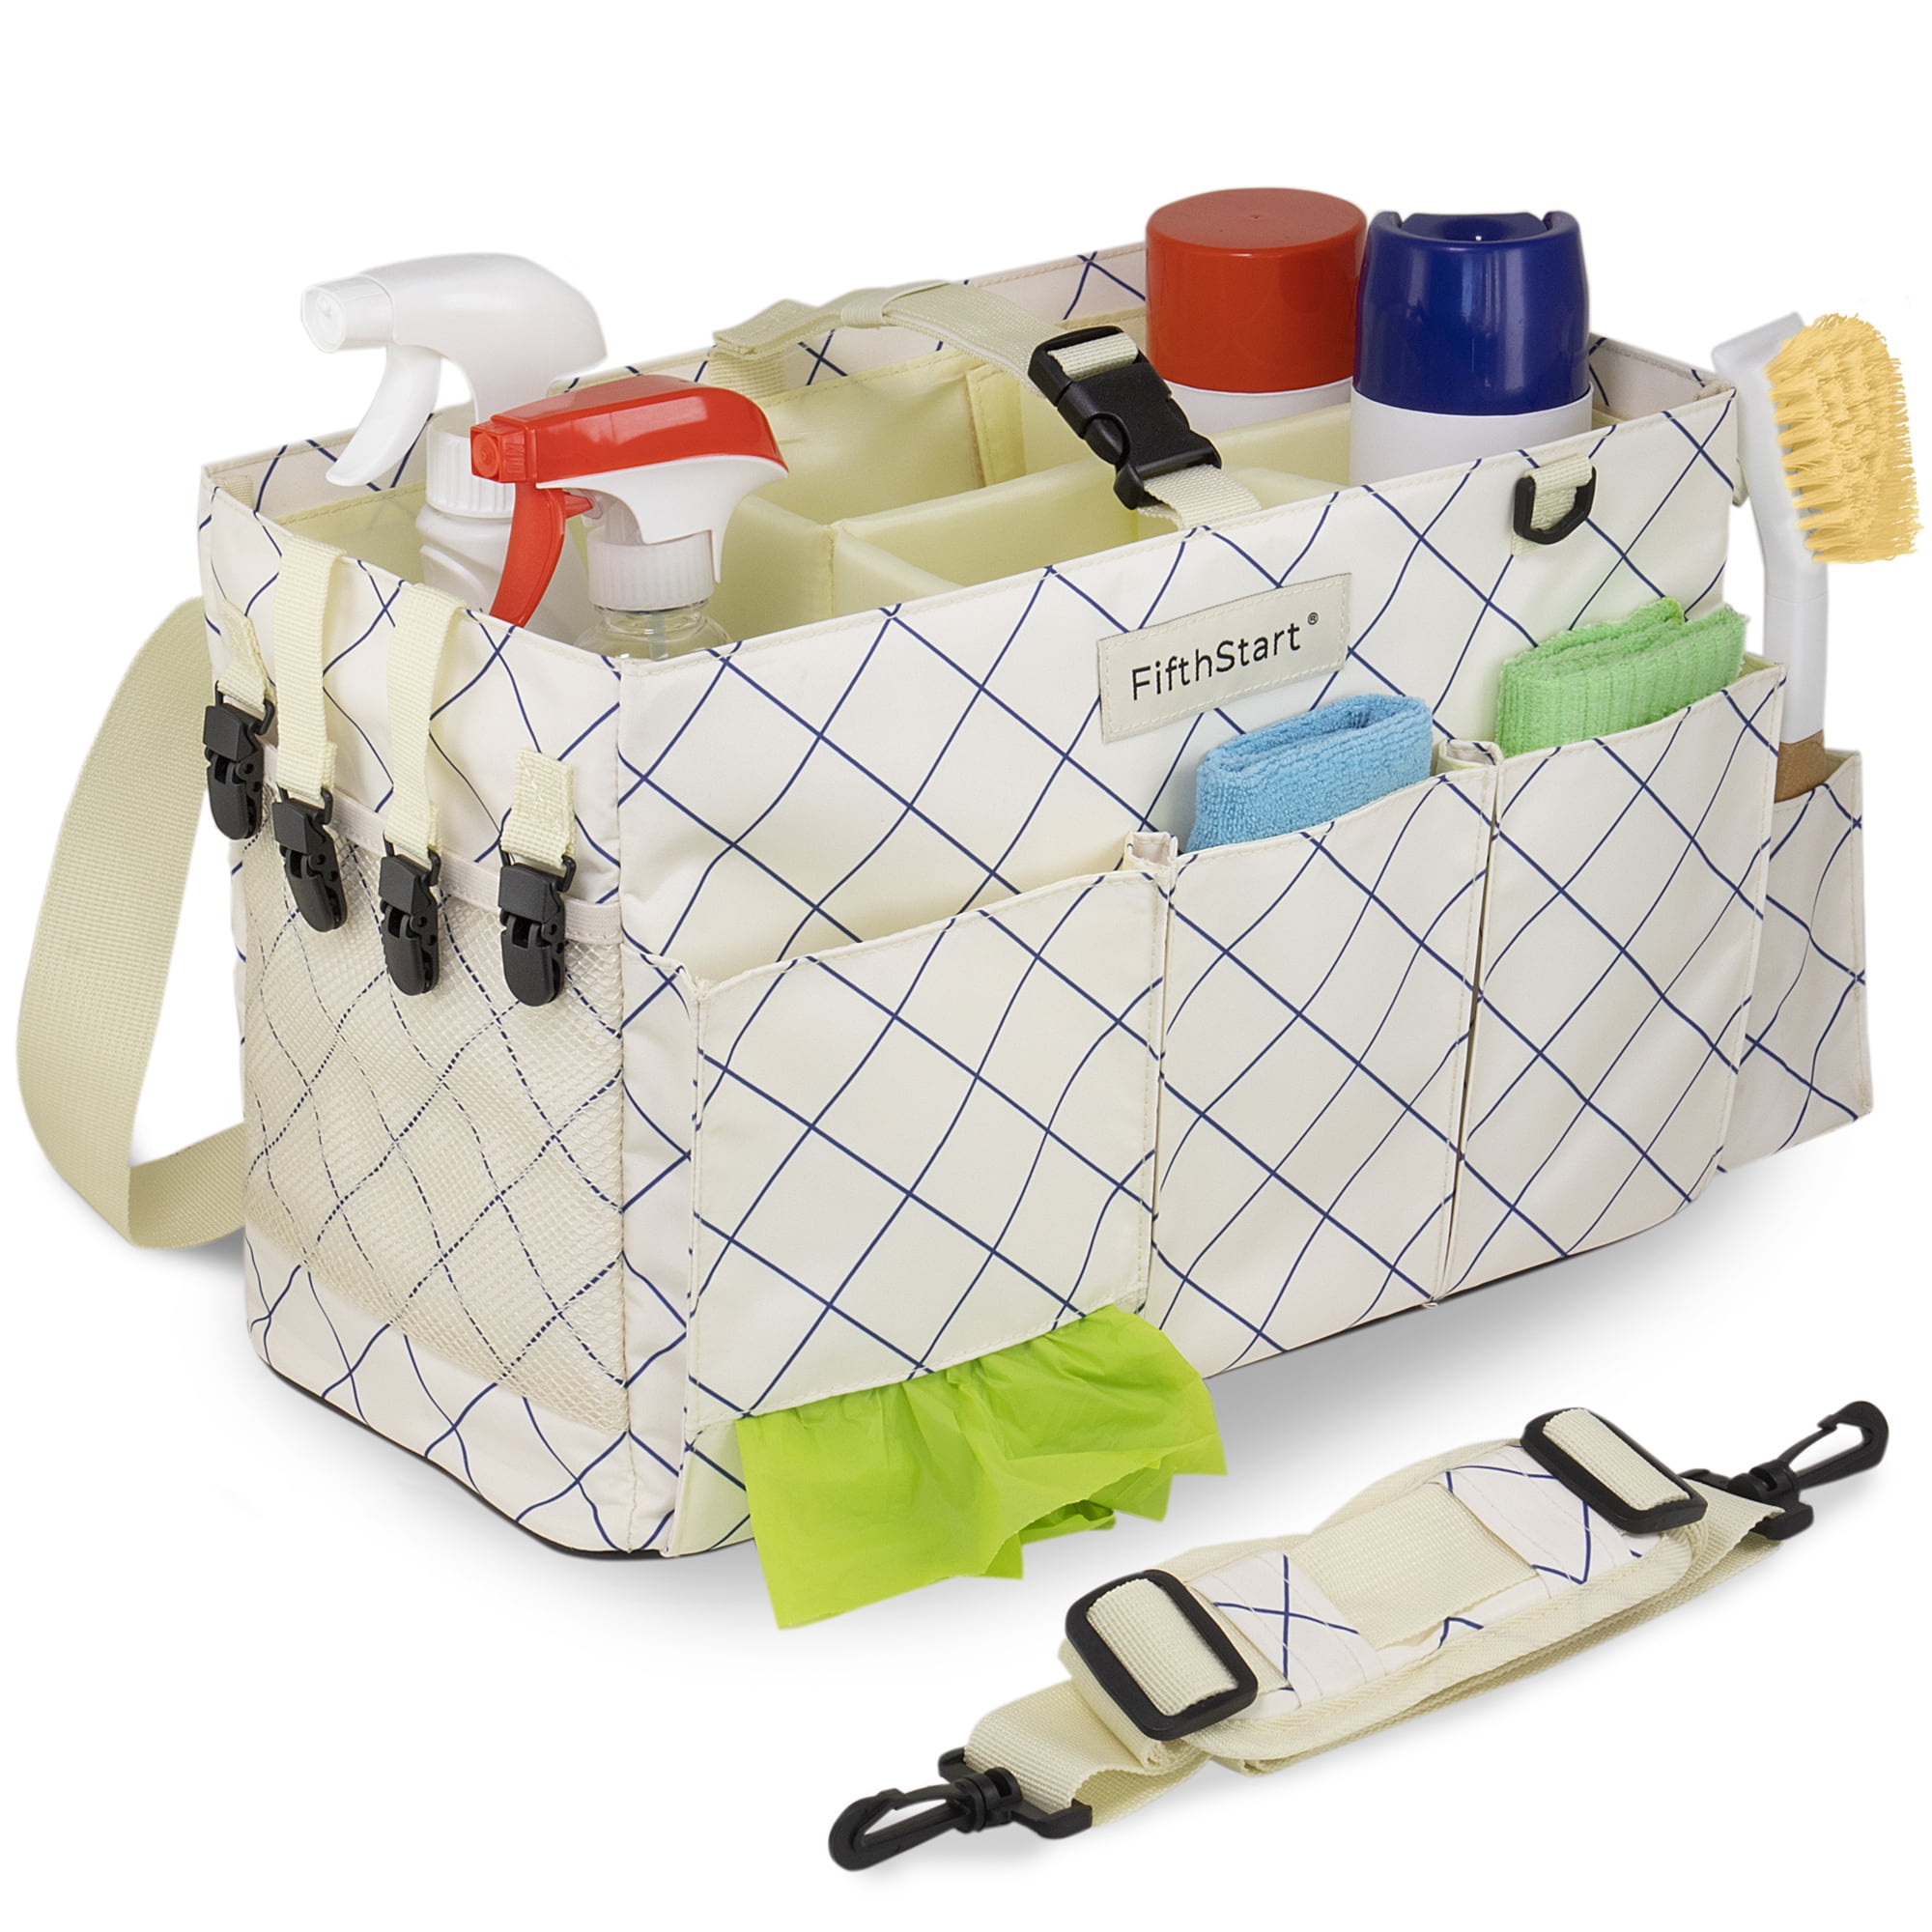 Large Cleaning Caddy with Handle, Wearable Cleaning Supplies